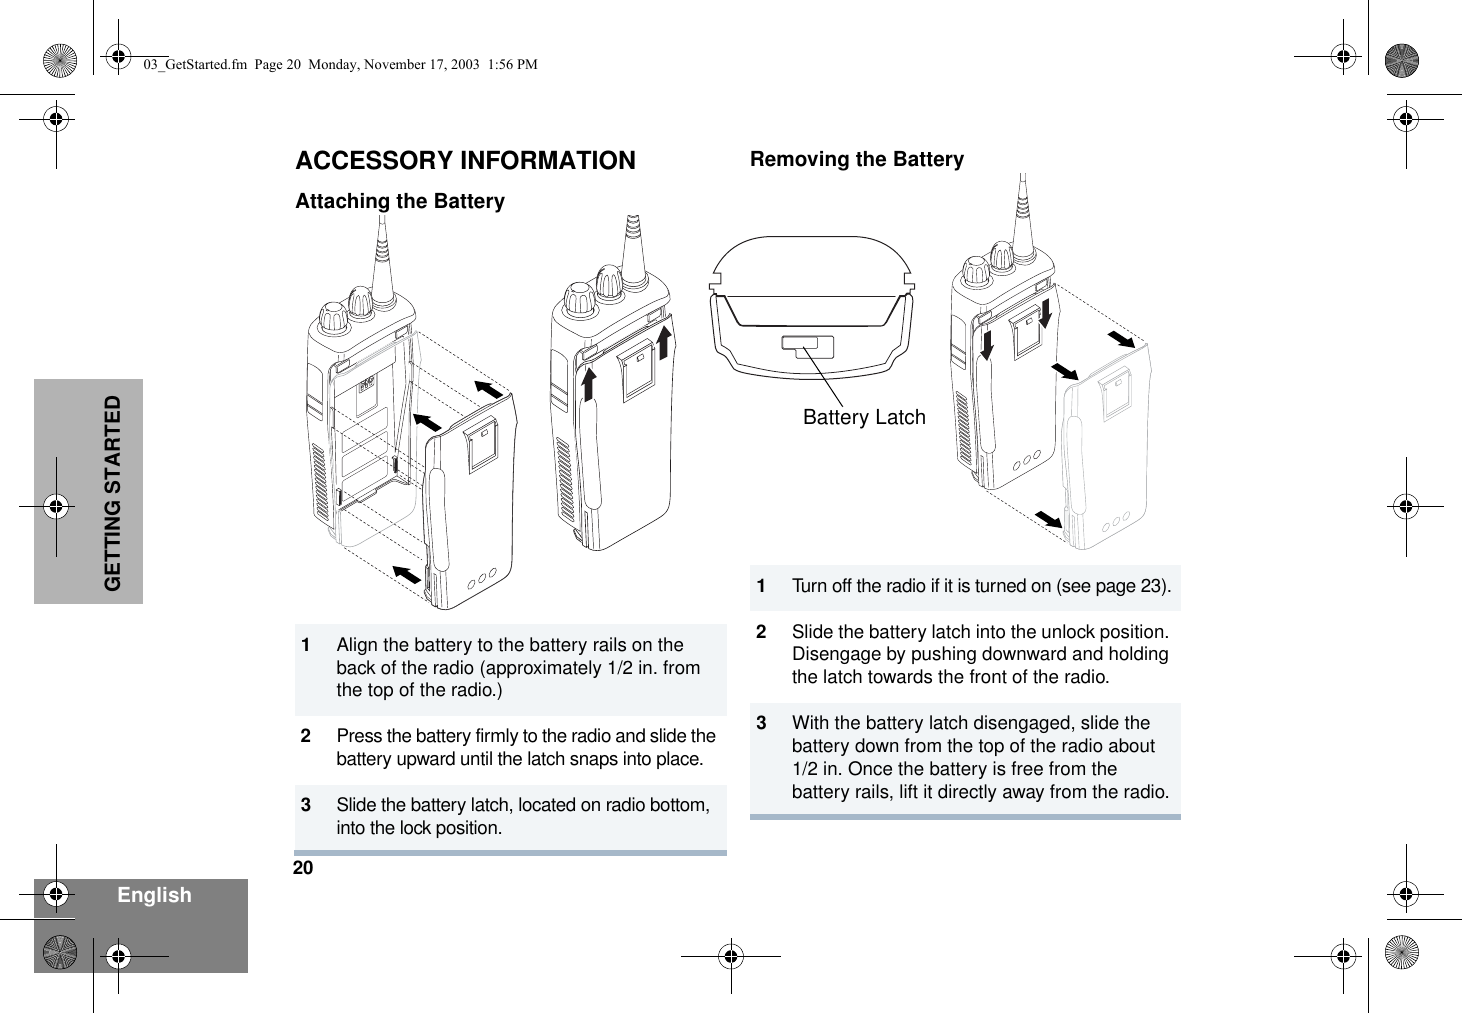 20EnglishGETTING STARTEDACCESSORY INFORMATIONAttaching the BatteryRemoving the Battery1Align the battery to the battery rails on the back of the radio (approximately 1/2 in. from the top of the radio.)2Press the battery firmly to the radio and slide the battery upward until the latch snaps into place.3Slide the battery latch, located on radio bottom,  into the lock position.1Turn off the radio if it is turned on (see page 23).2Slide the battery latch into the unlock position. Disengage by pushing downward and holding the latch towards the front of the radio.3With the battery latch disengaged, slide the battery down from the top of the radio about 1/2 in. Once the battery is free from the battery rails, lift it directly away from the radio.Battery Latch03_GetStarted.fm  Page 20  Monday, November 17, 2003  1:56 PM